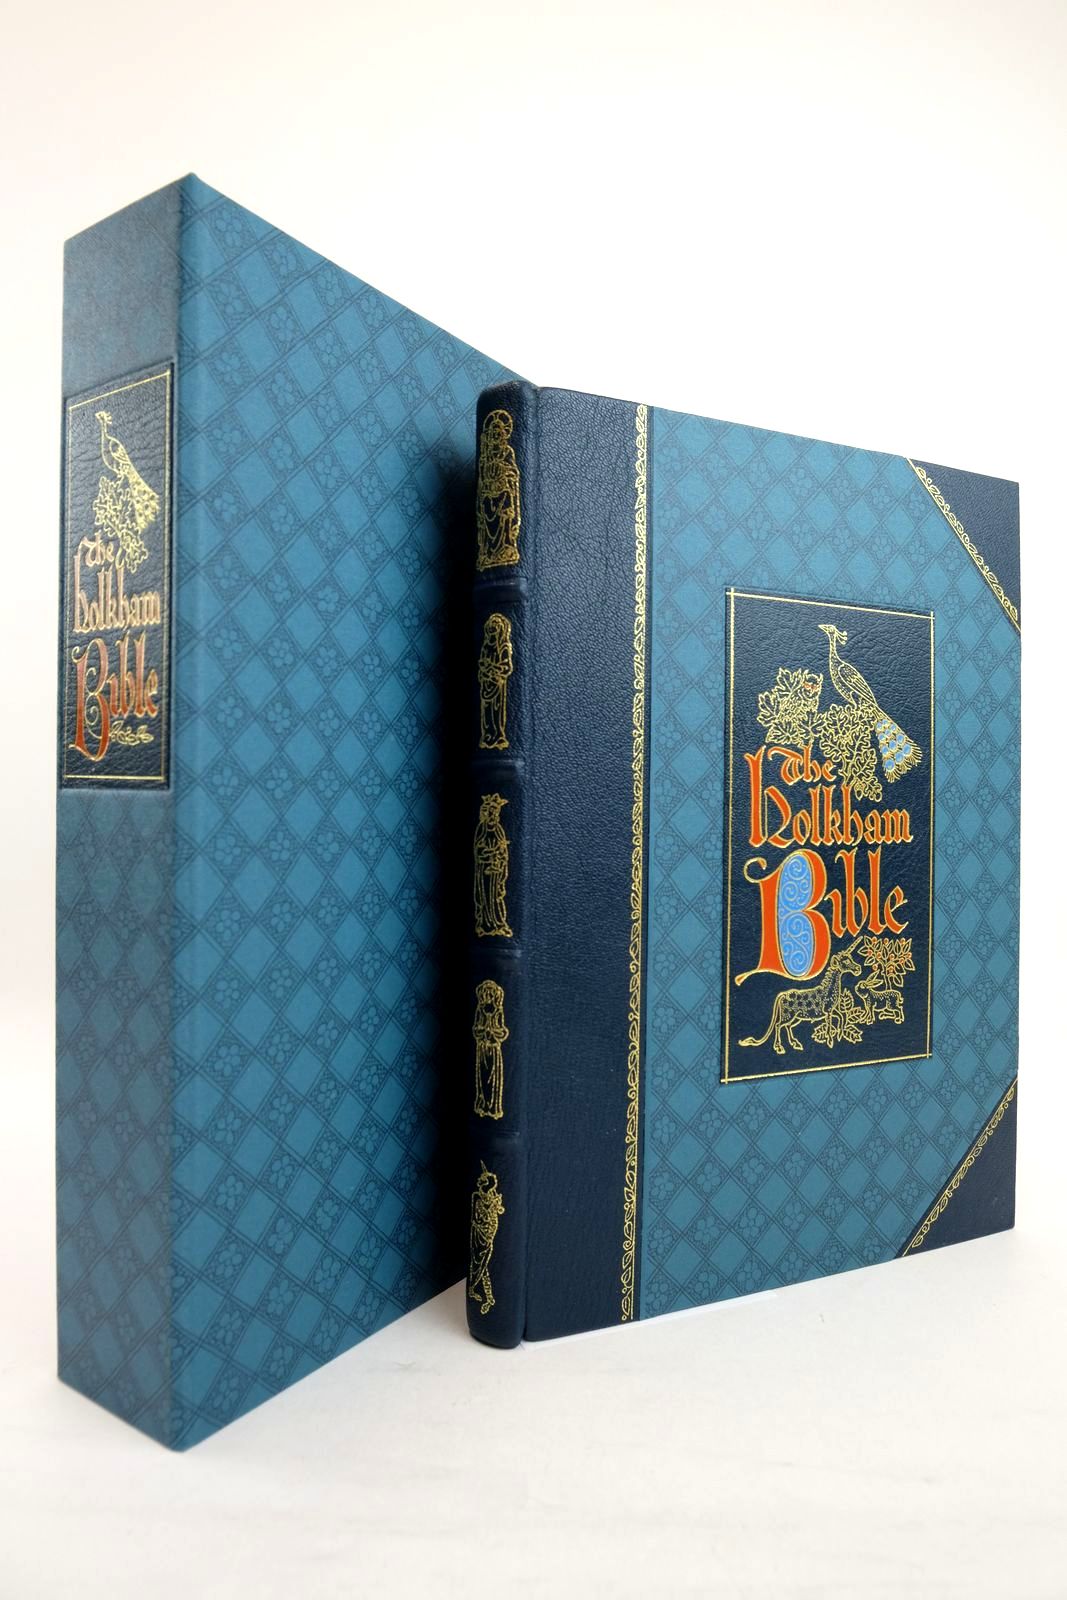 Photo of THE HOLKHAM BIBLE written by Brown, Michelle P. published by Folio Society (STOCK CODE: 2134457)  for sale by Stella & Rose's Books